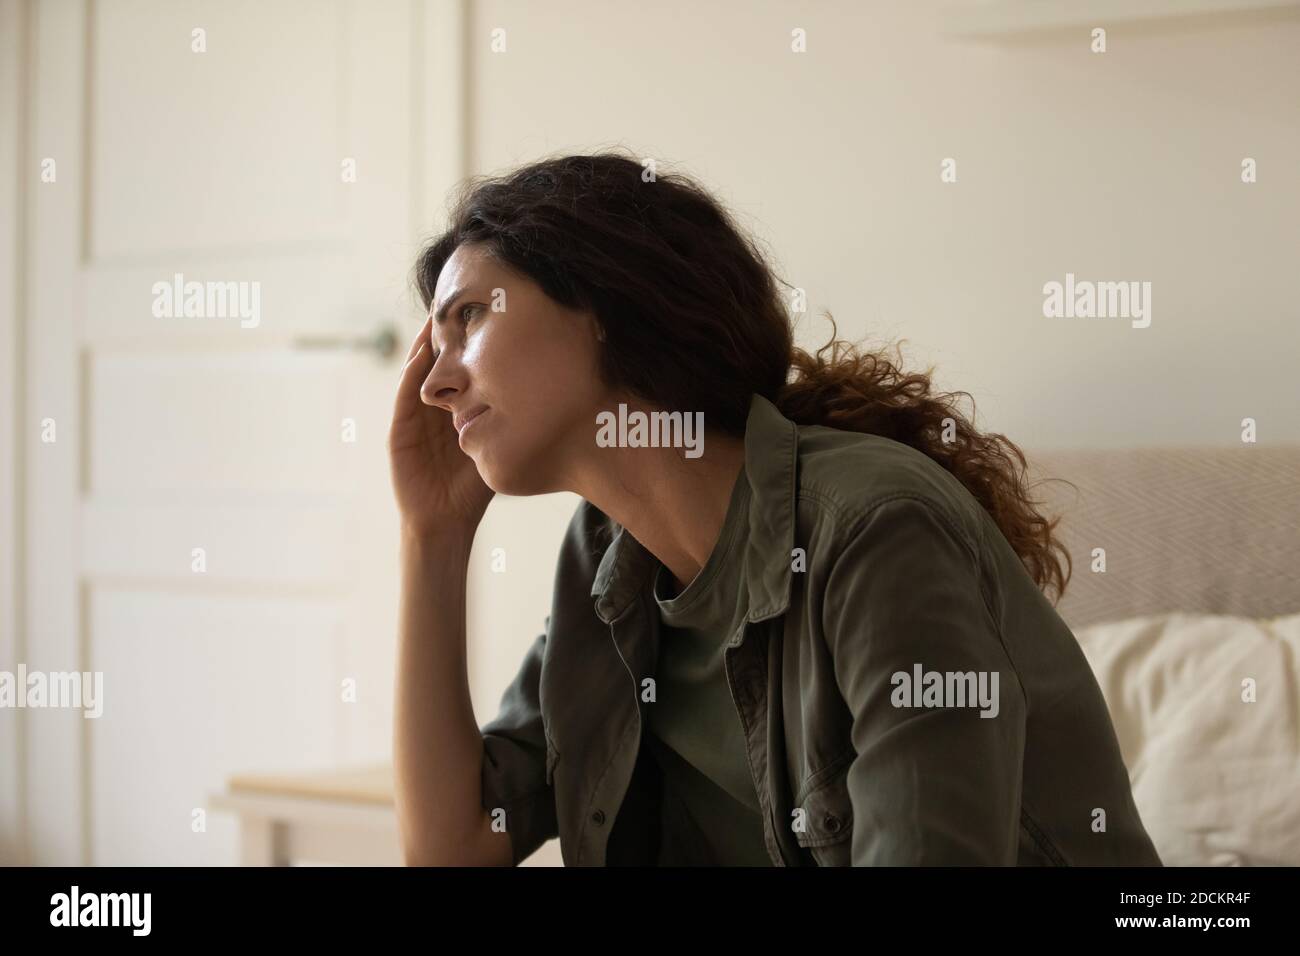 Upset young woman feeling unhappy stressed at home Stock Photo